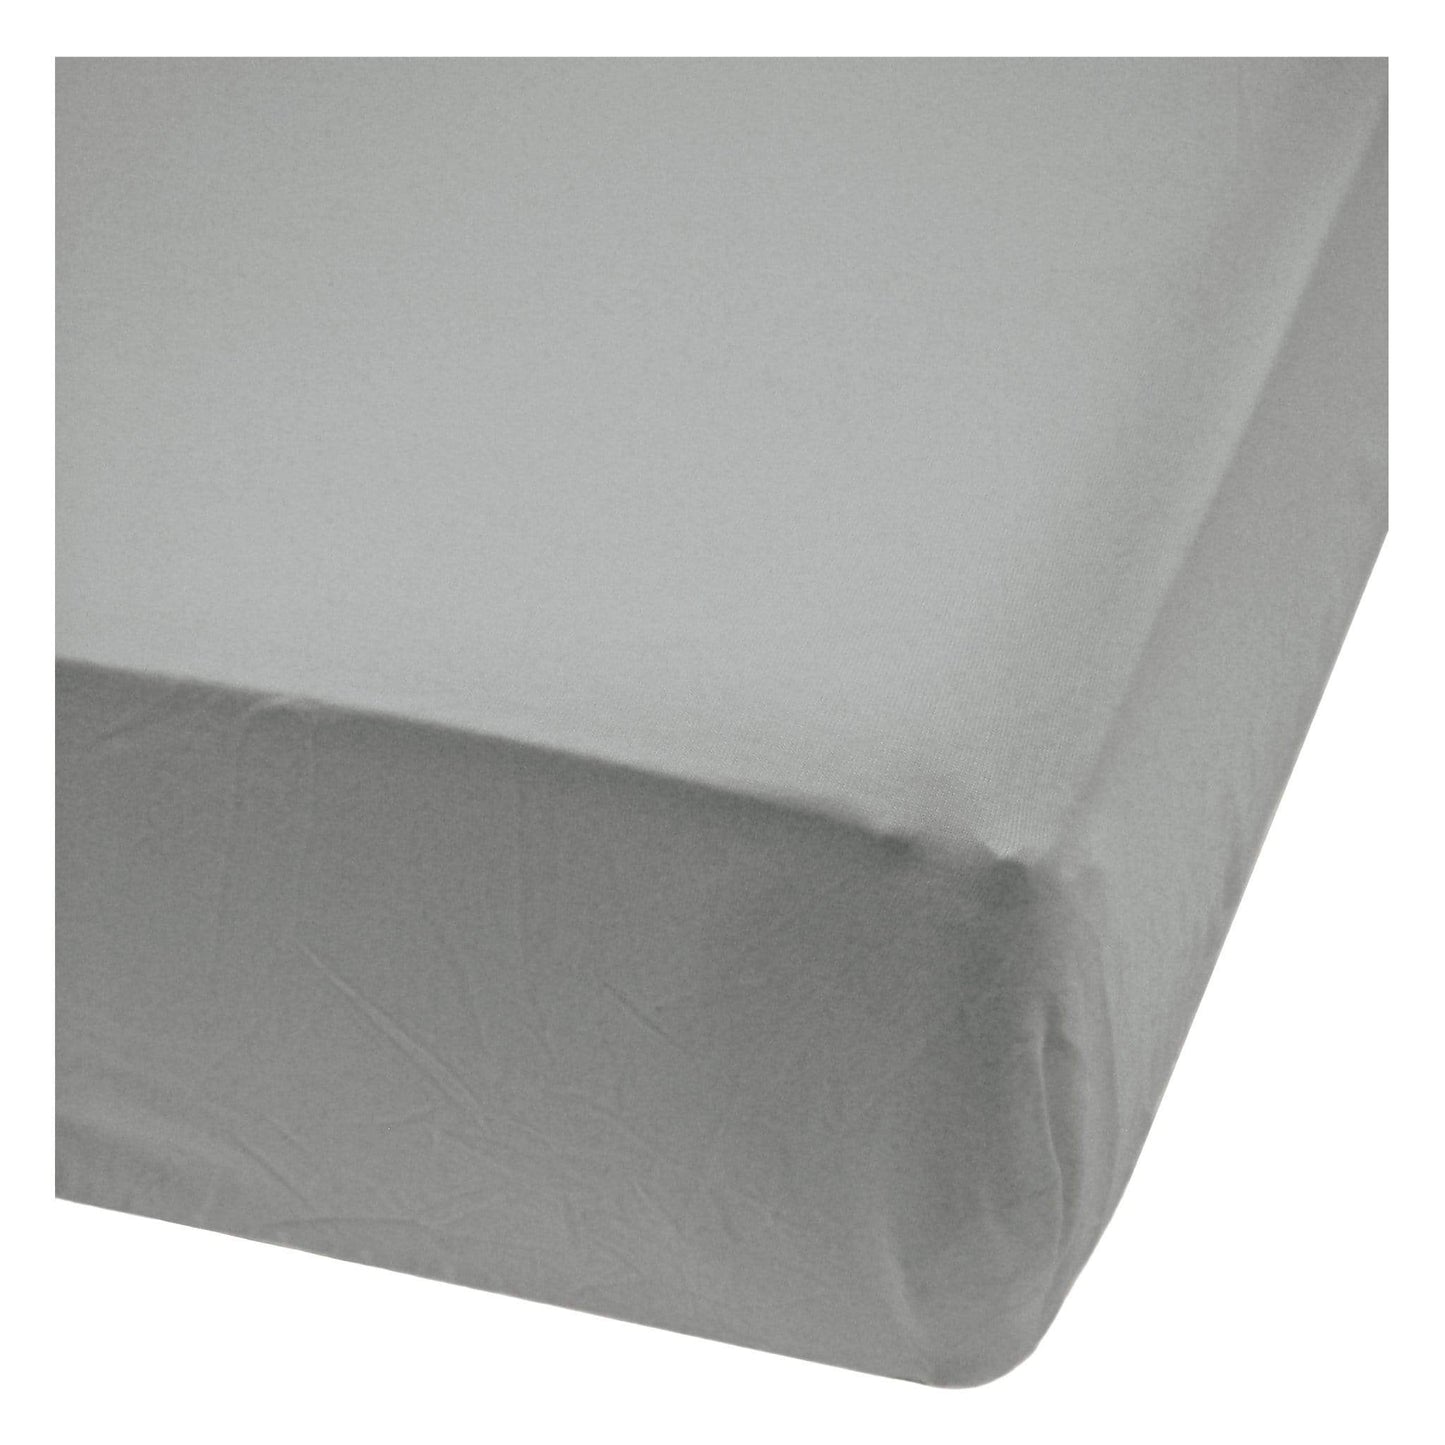 Bamboo fitted sheet - Pebble